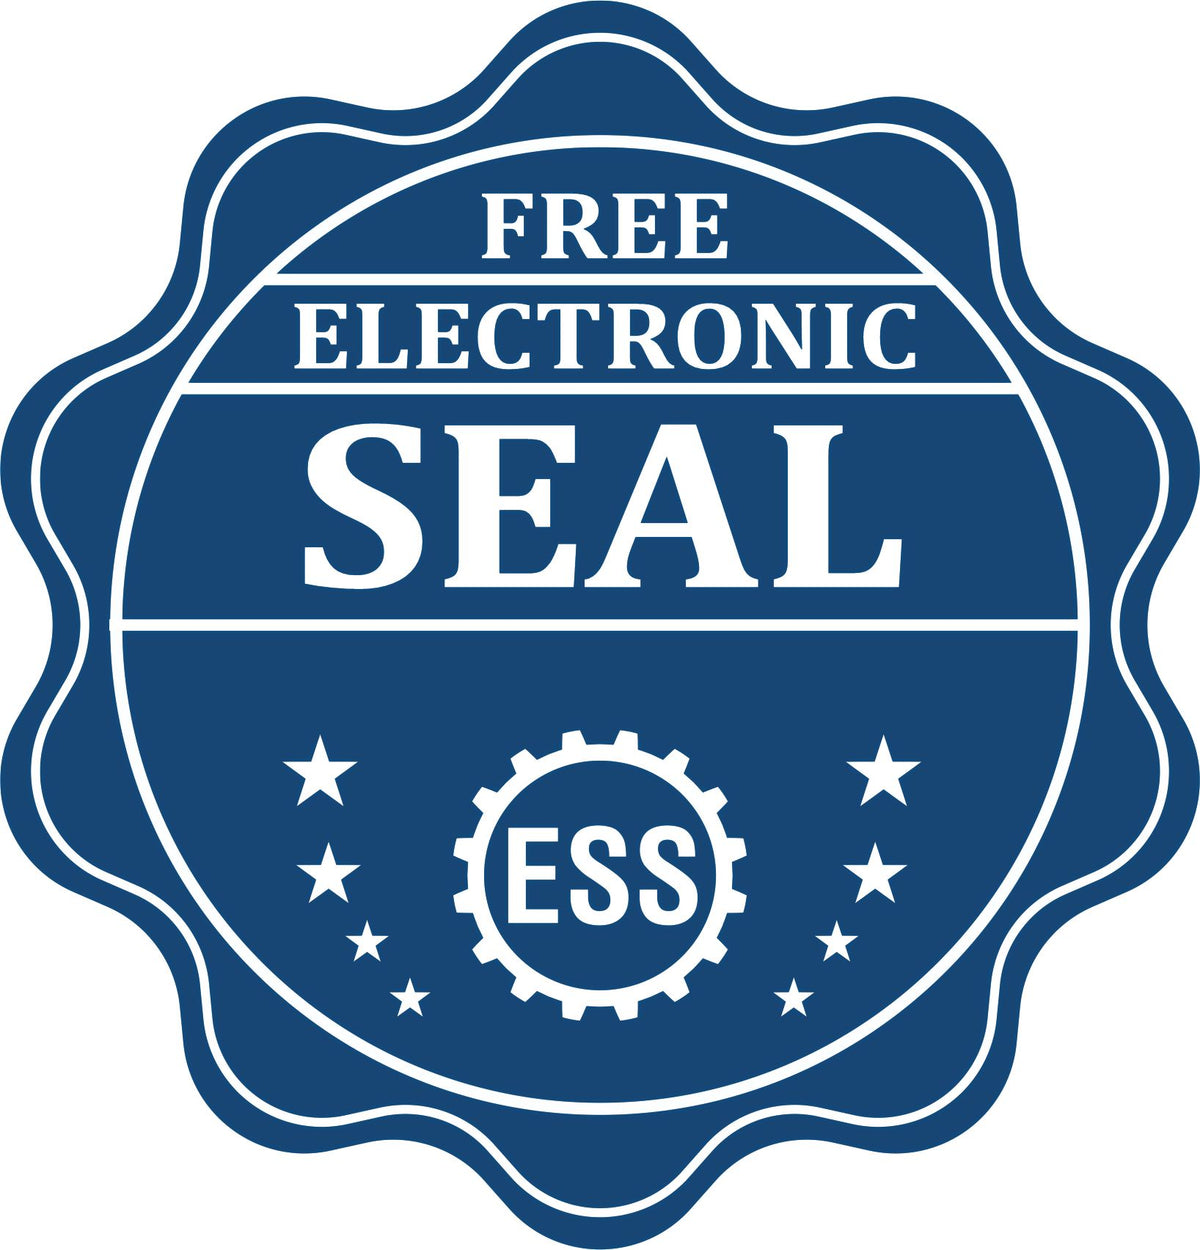 A badge showing a free electronic seal for the Wisconsin Geologist Desk Seal with stars and the ESS gear on the emblem.